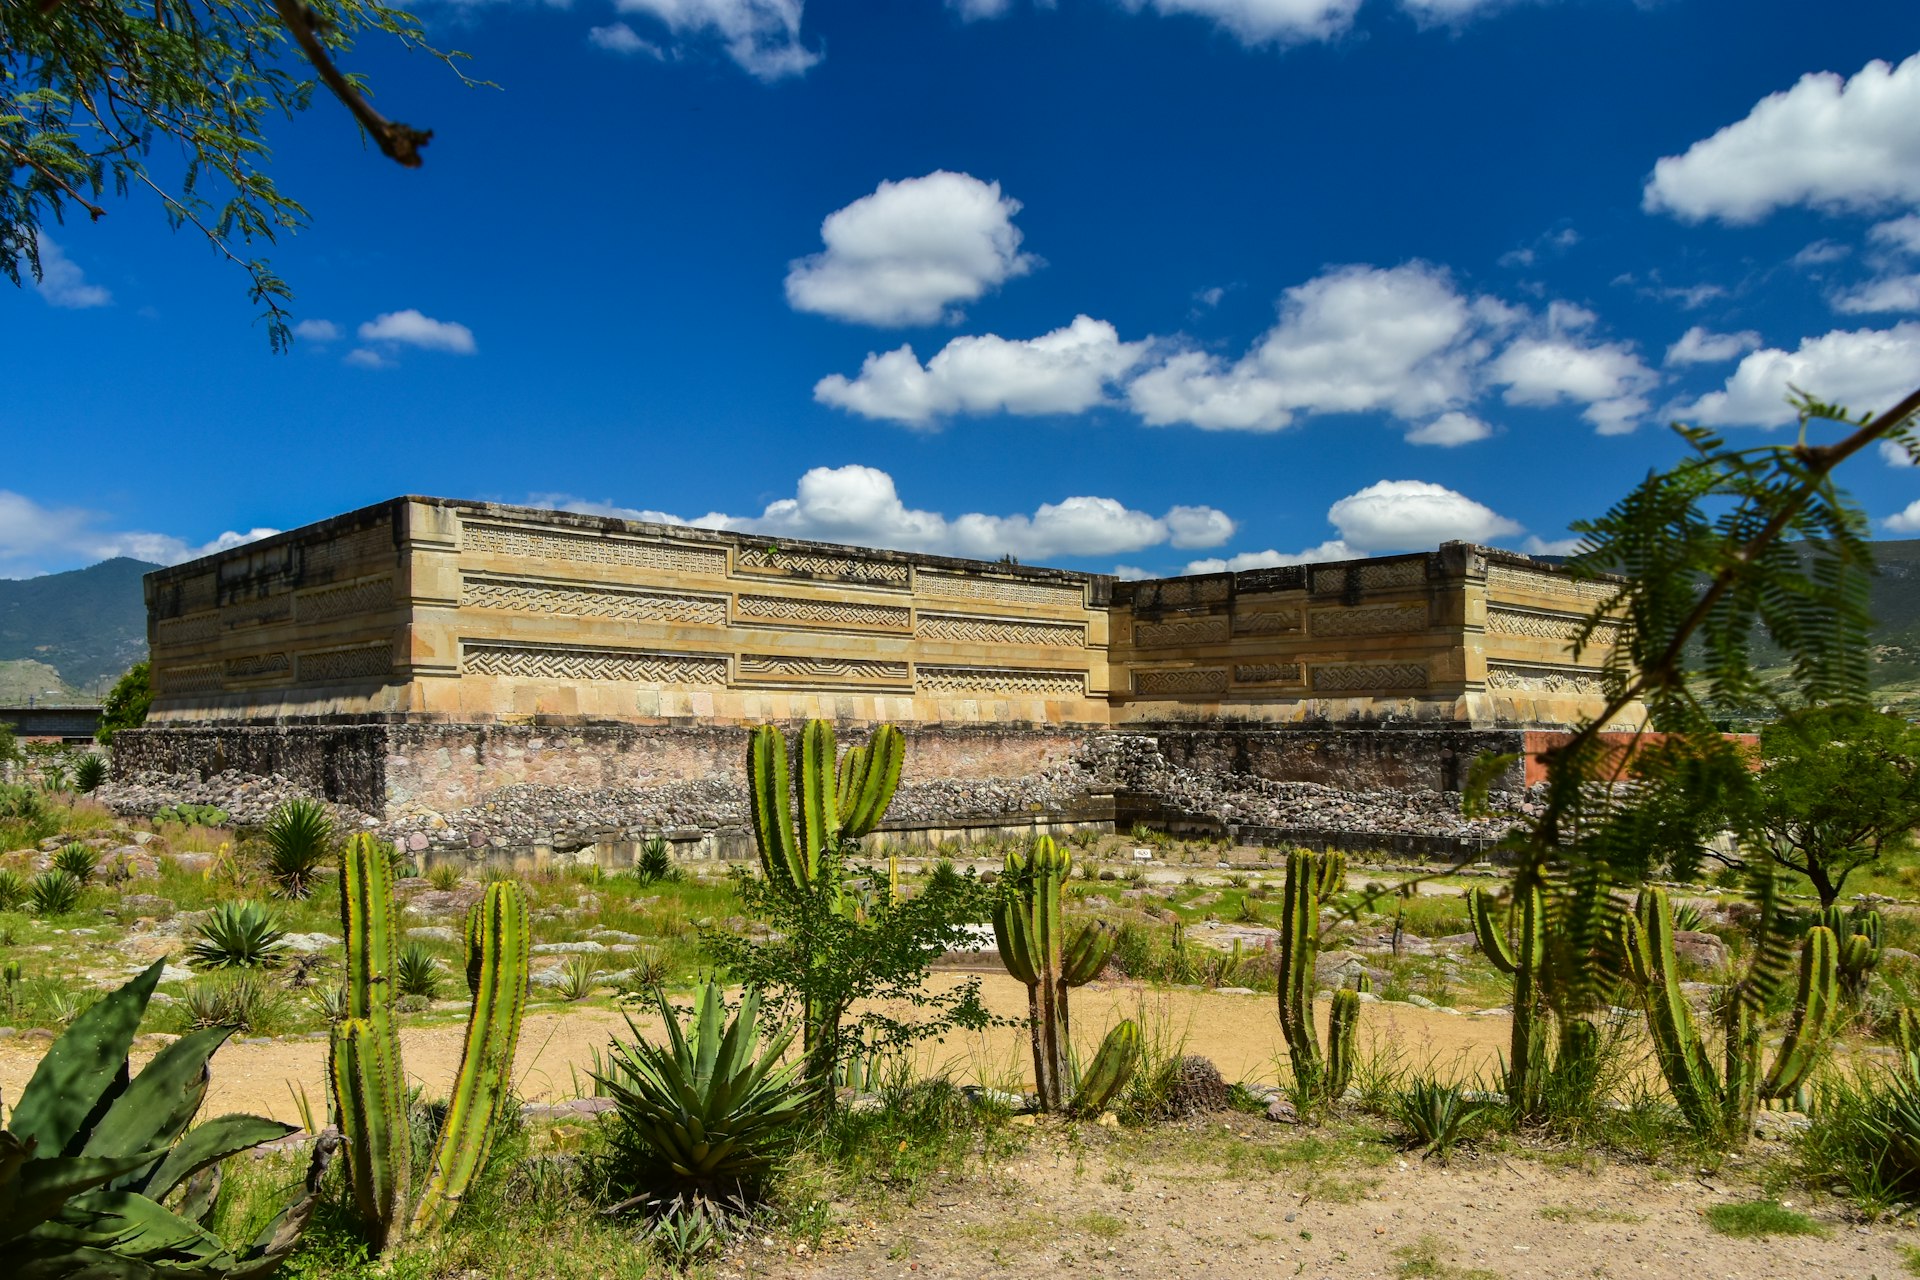 Zapotec ruins seen in front of agave plants under a blue sky at the Mitla archeological site